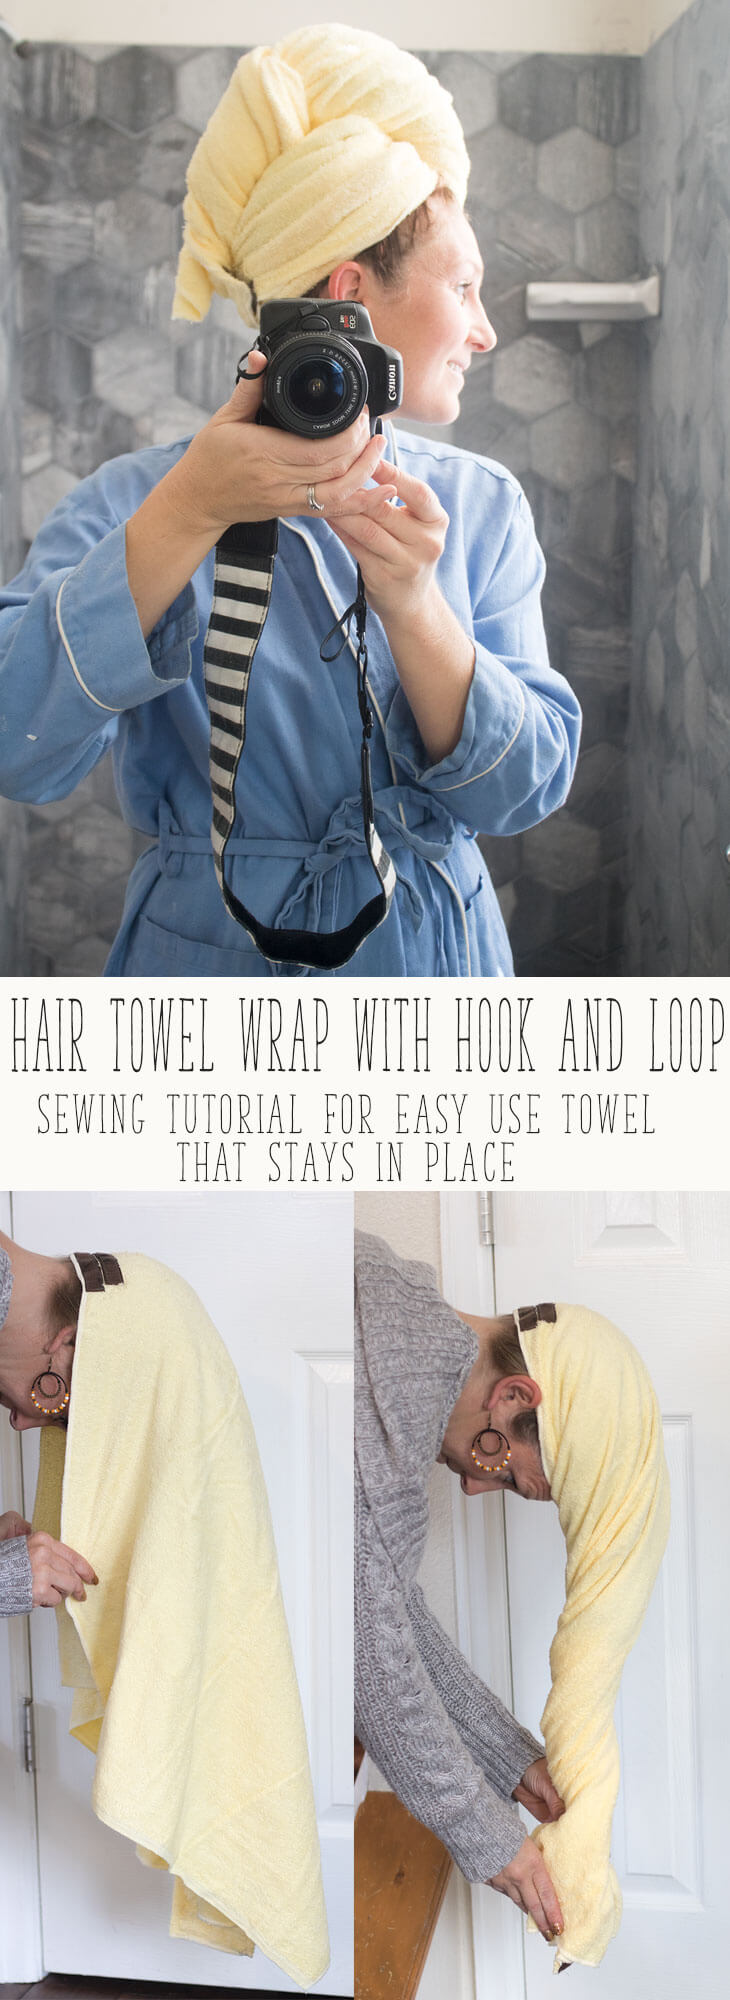 hair towel wrap sewing tutorial from Life Sew Savory #FashionColorExpert AD